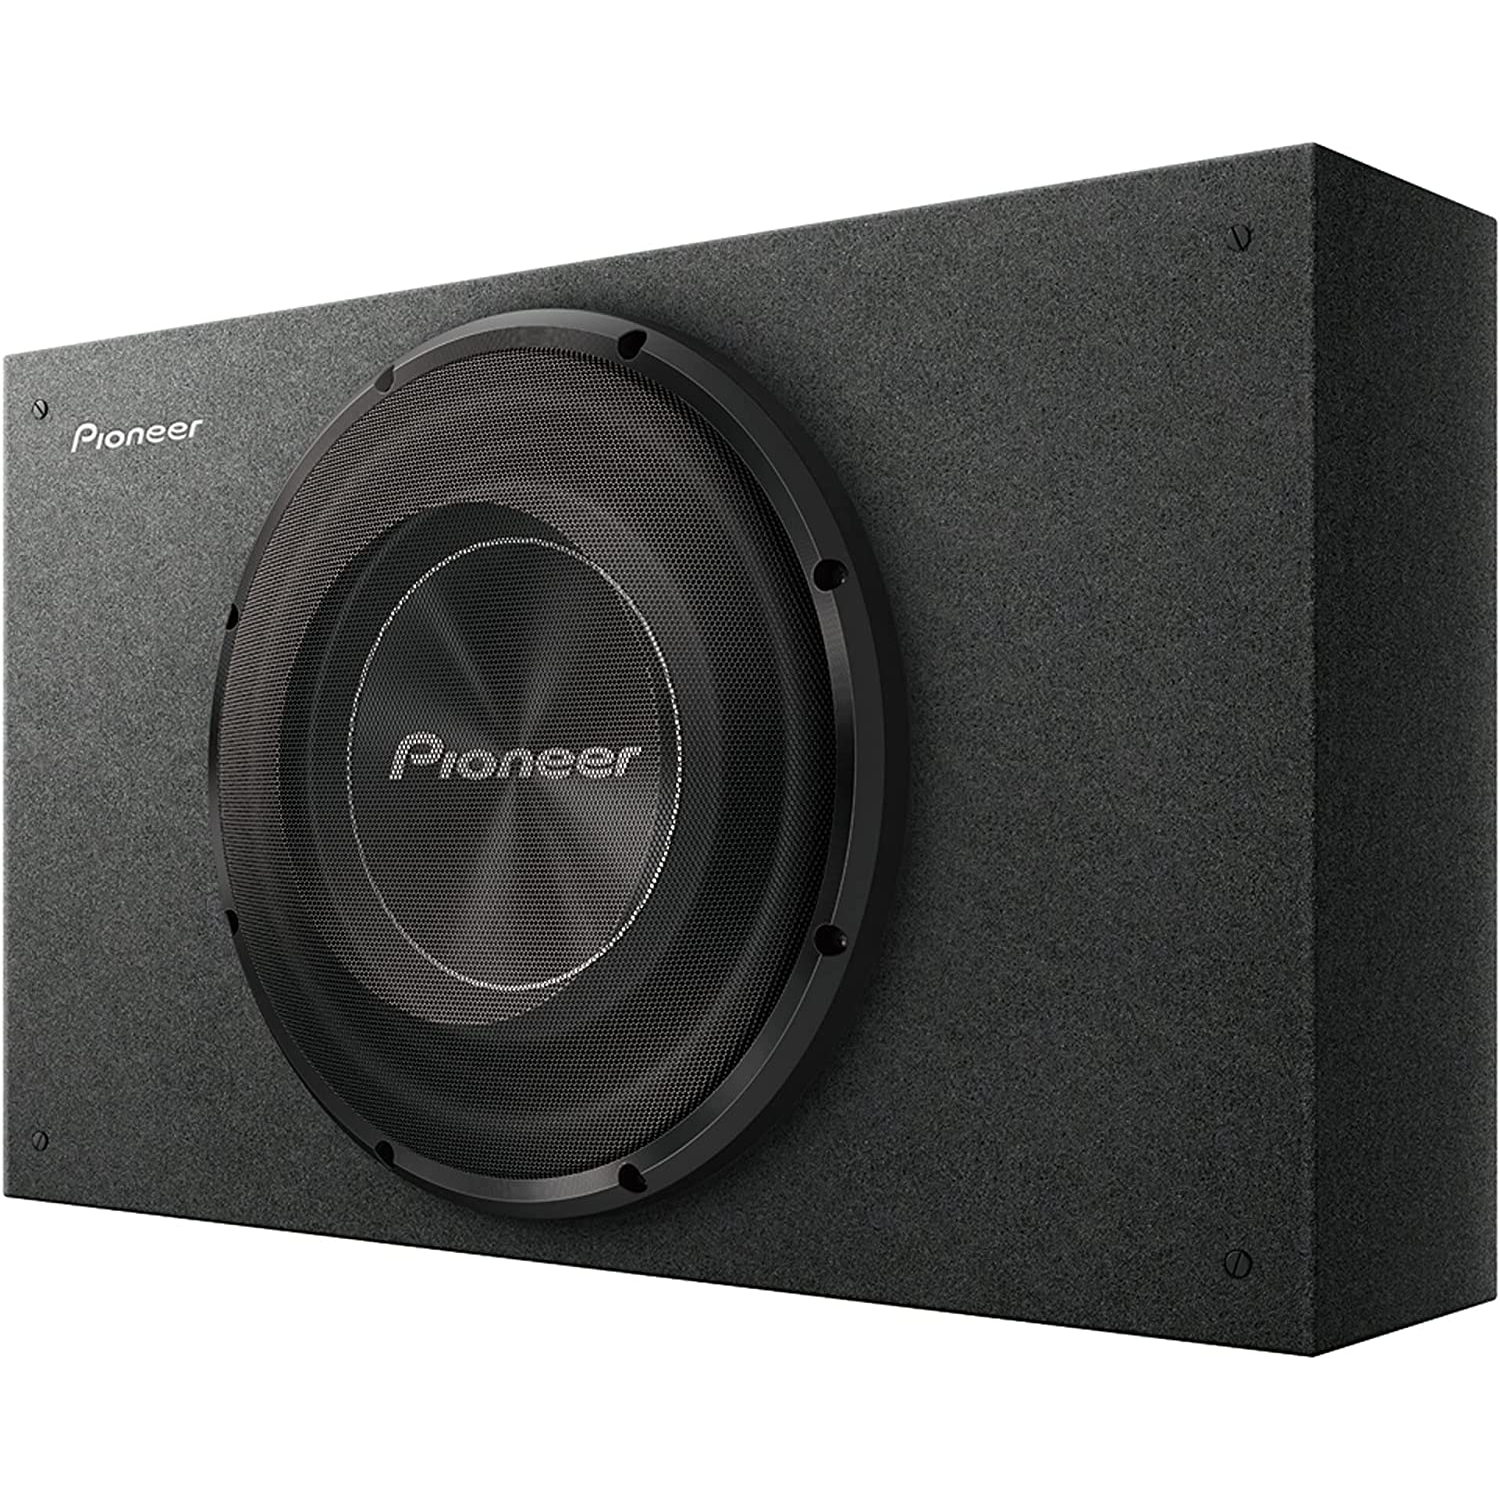 Pioneer TS-A3000LB 12" 1500 W Max Power/ 400 W RMS, Single 2W Voice Coil Pre-Loaded Enclosure Subwoofer